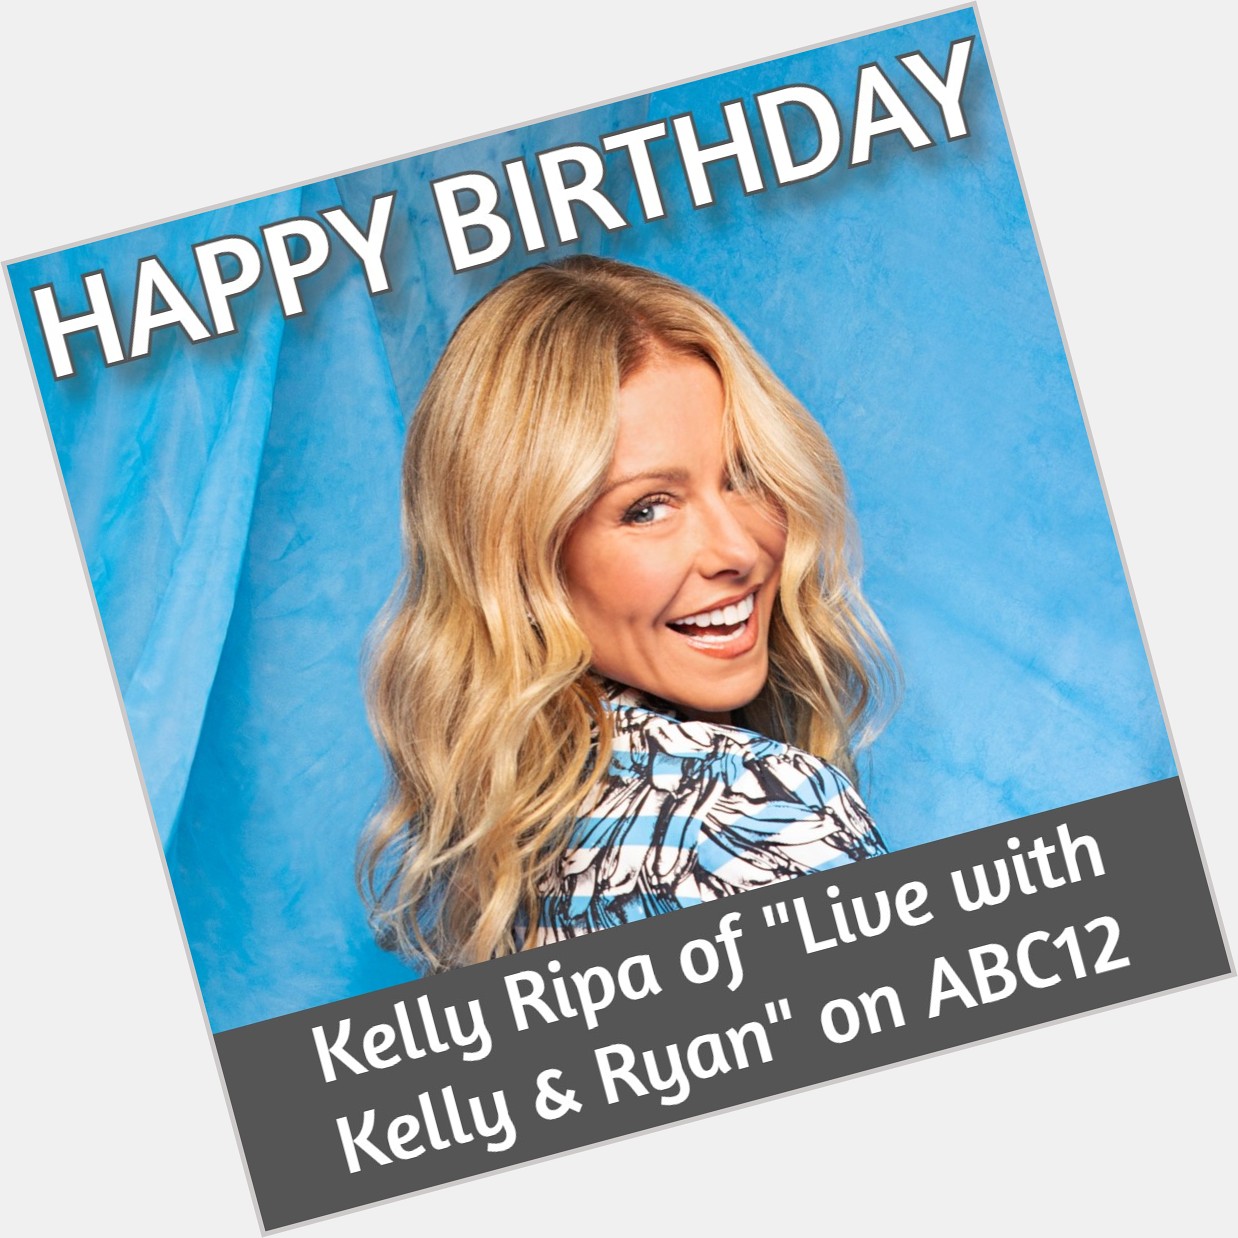  HAPPY BIRTHDAY! Kelly Ripa turns 52 today and you can watch her on ABC12! 